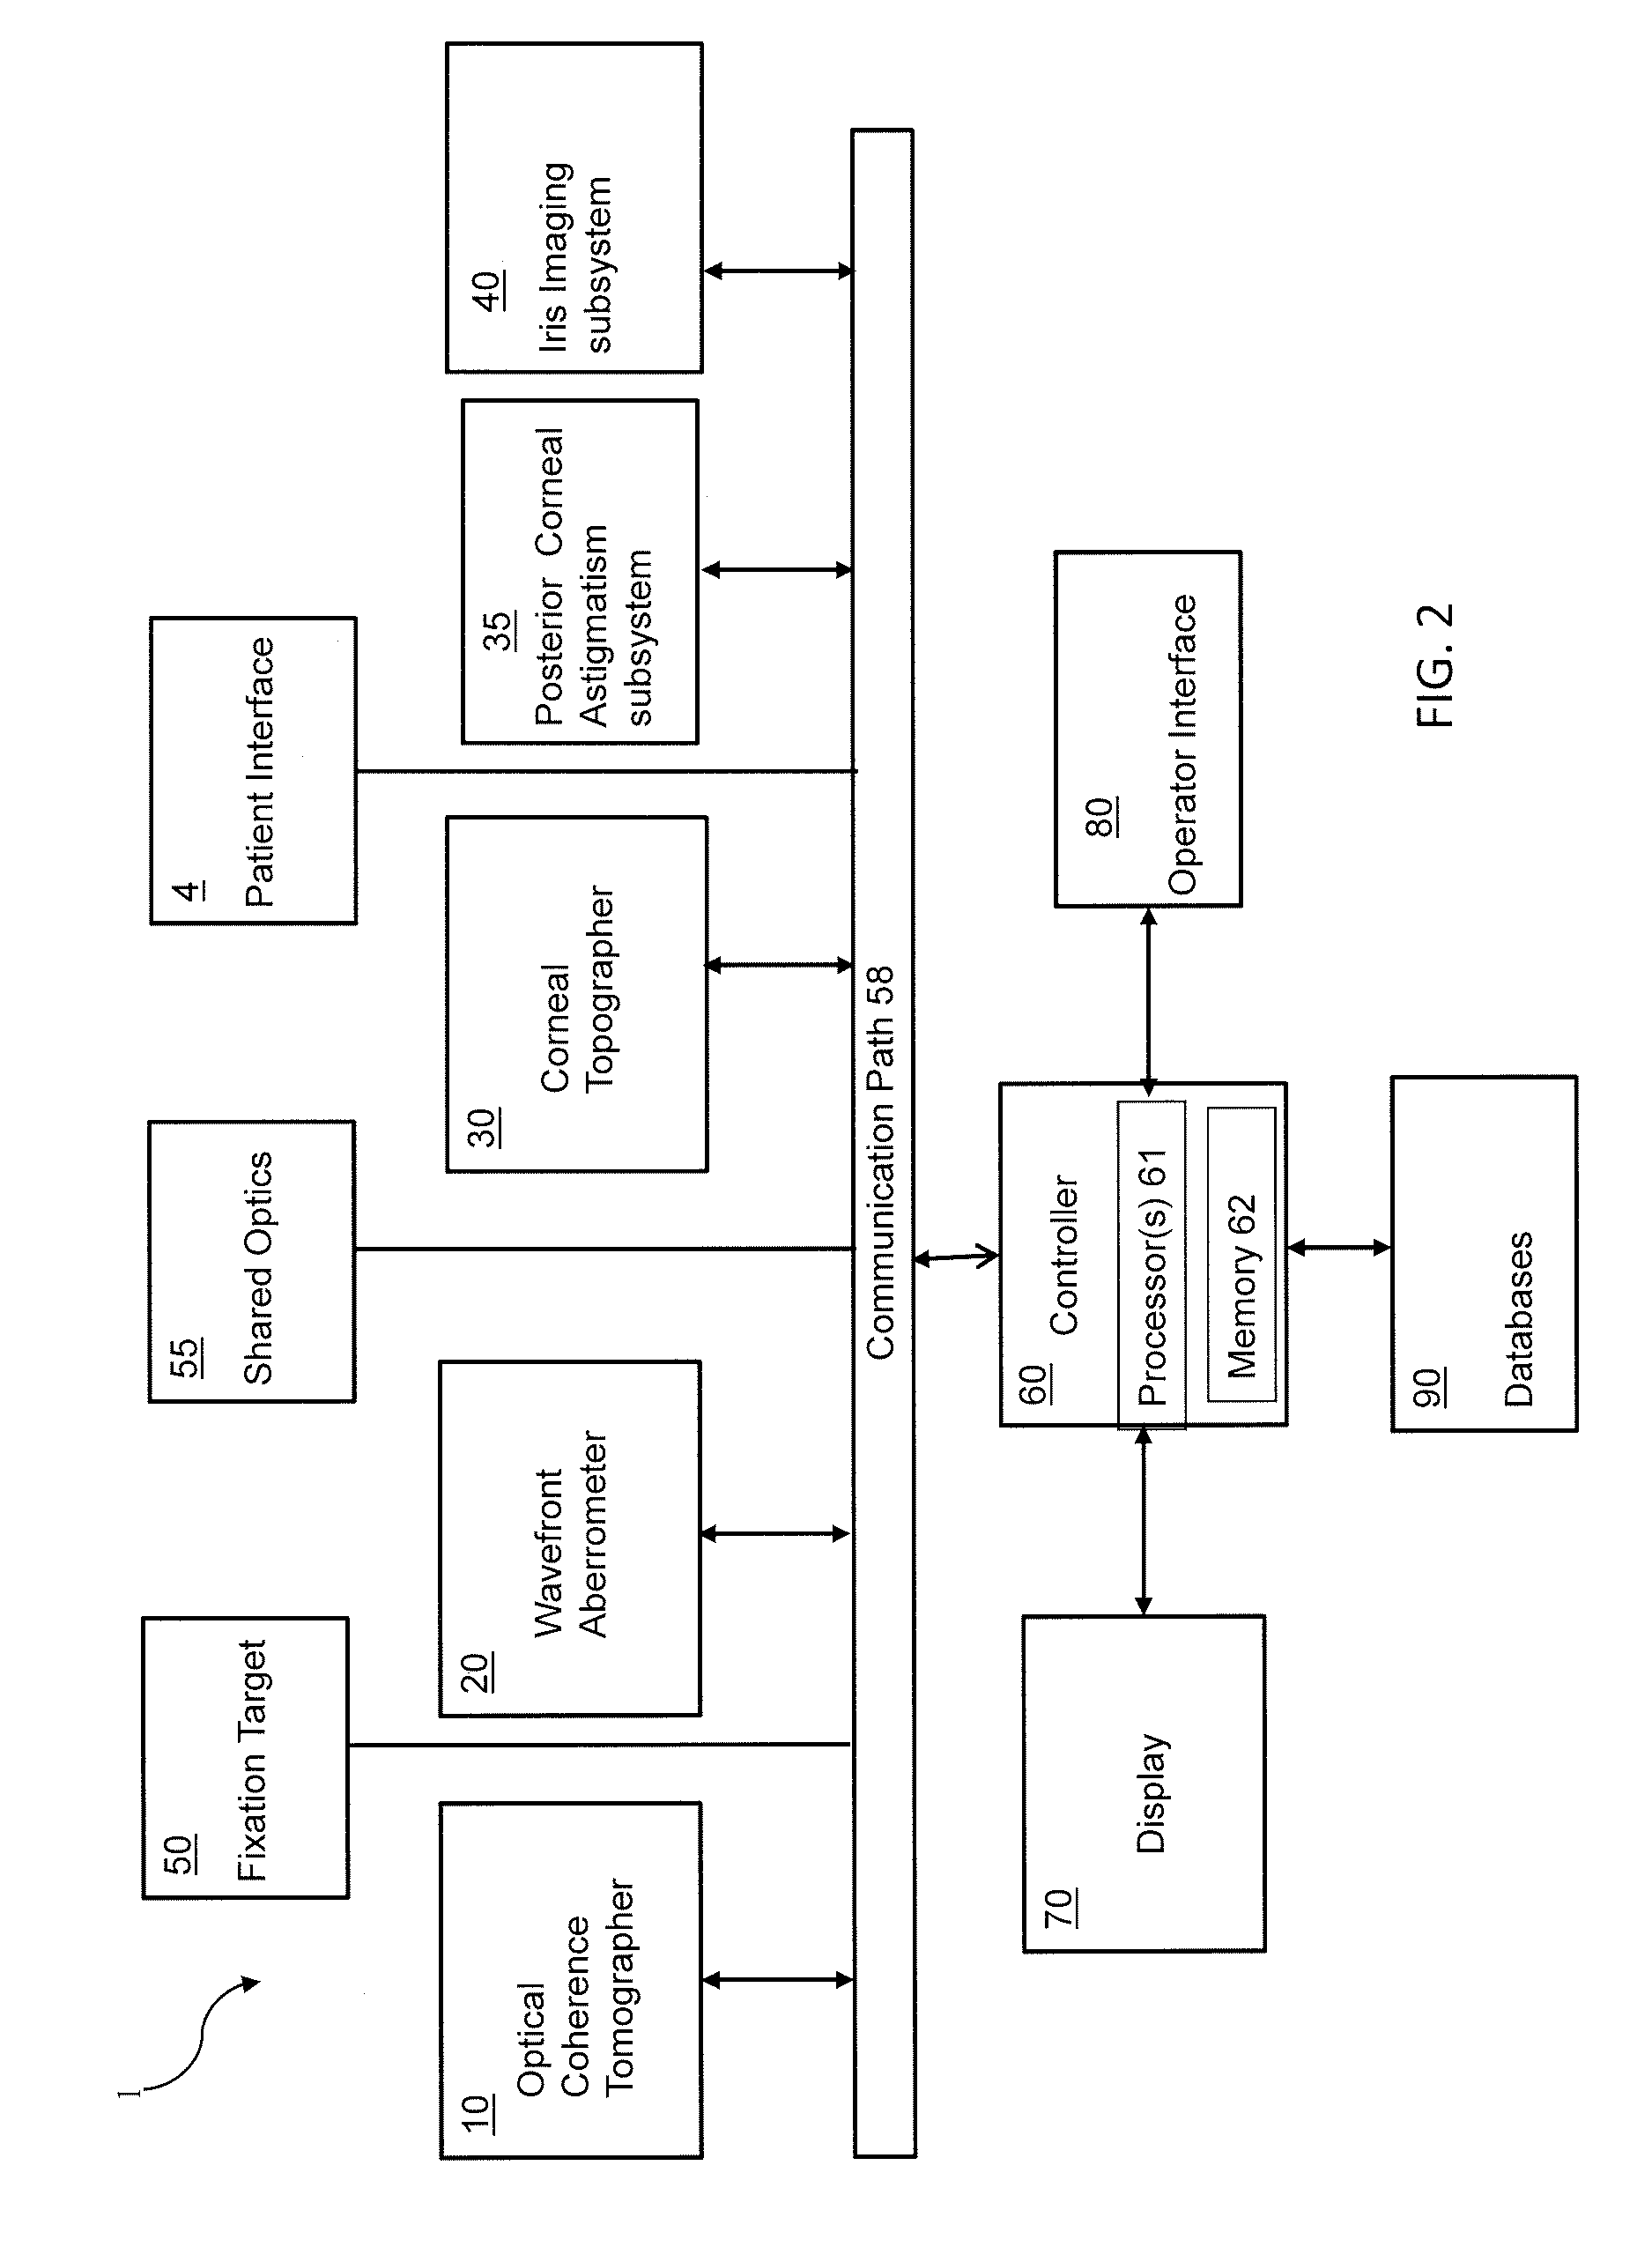 Optical imaging and measurement systems and methods for cataract surgery and treatment planning